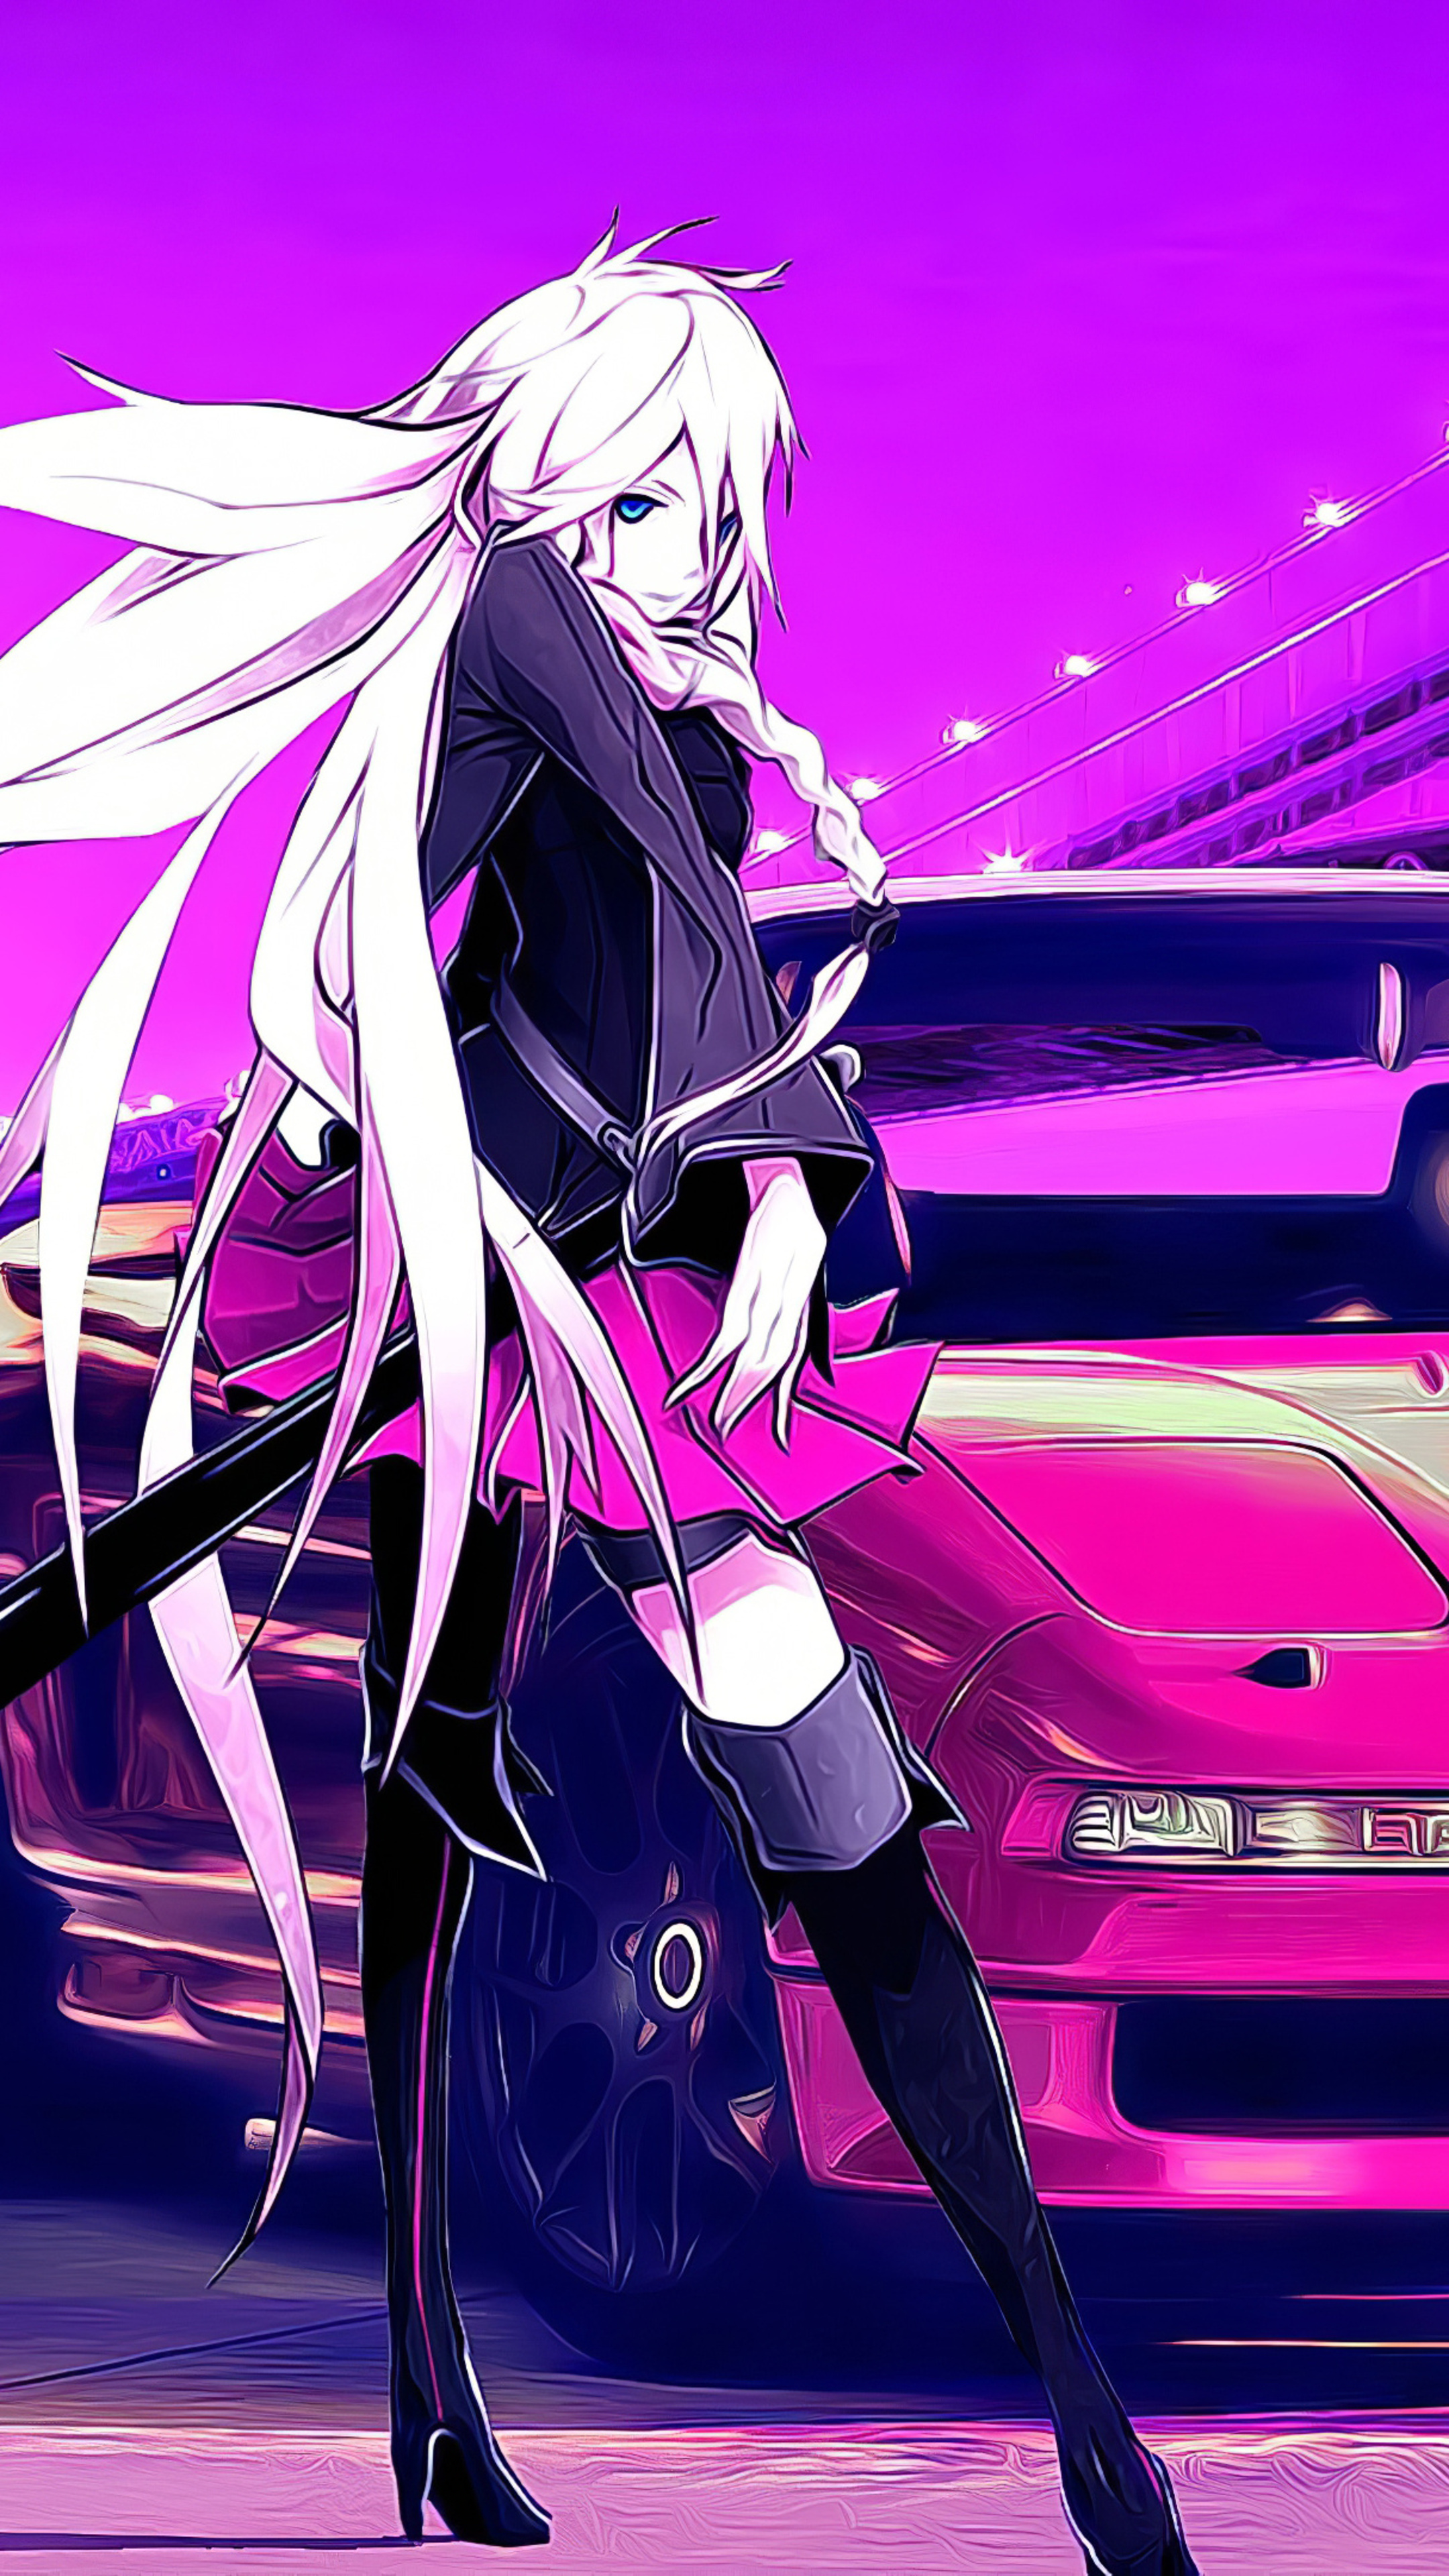 IA Vocaloid, Anime character, 4K wallpapers, Vocaloid enthusiasts, 2160x3840 4K Handy